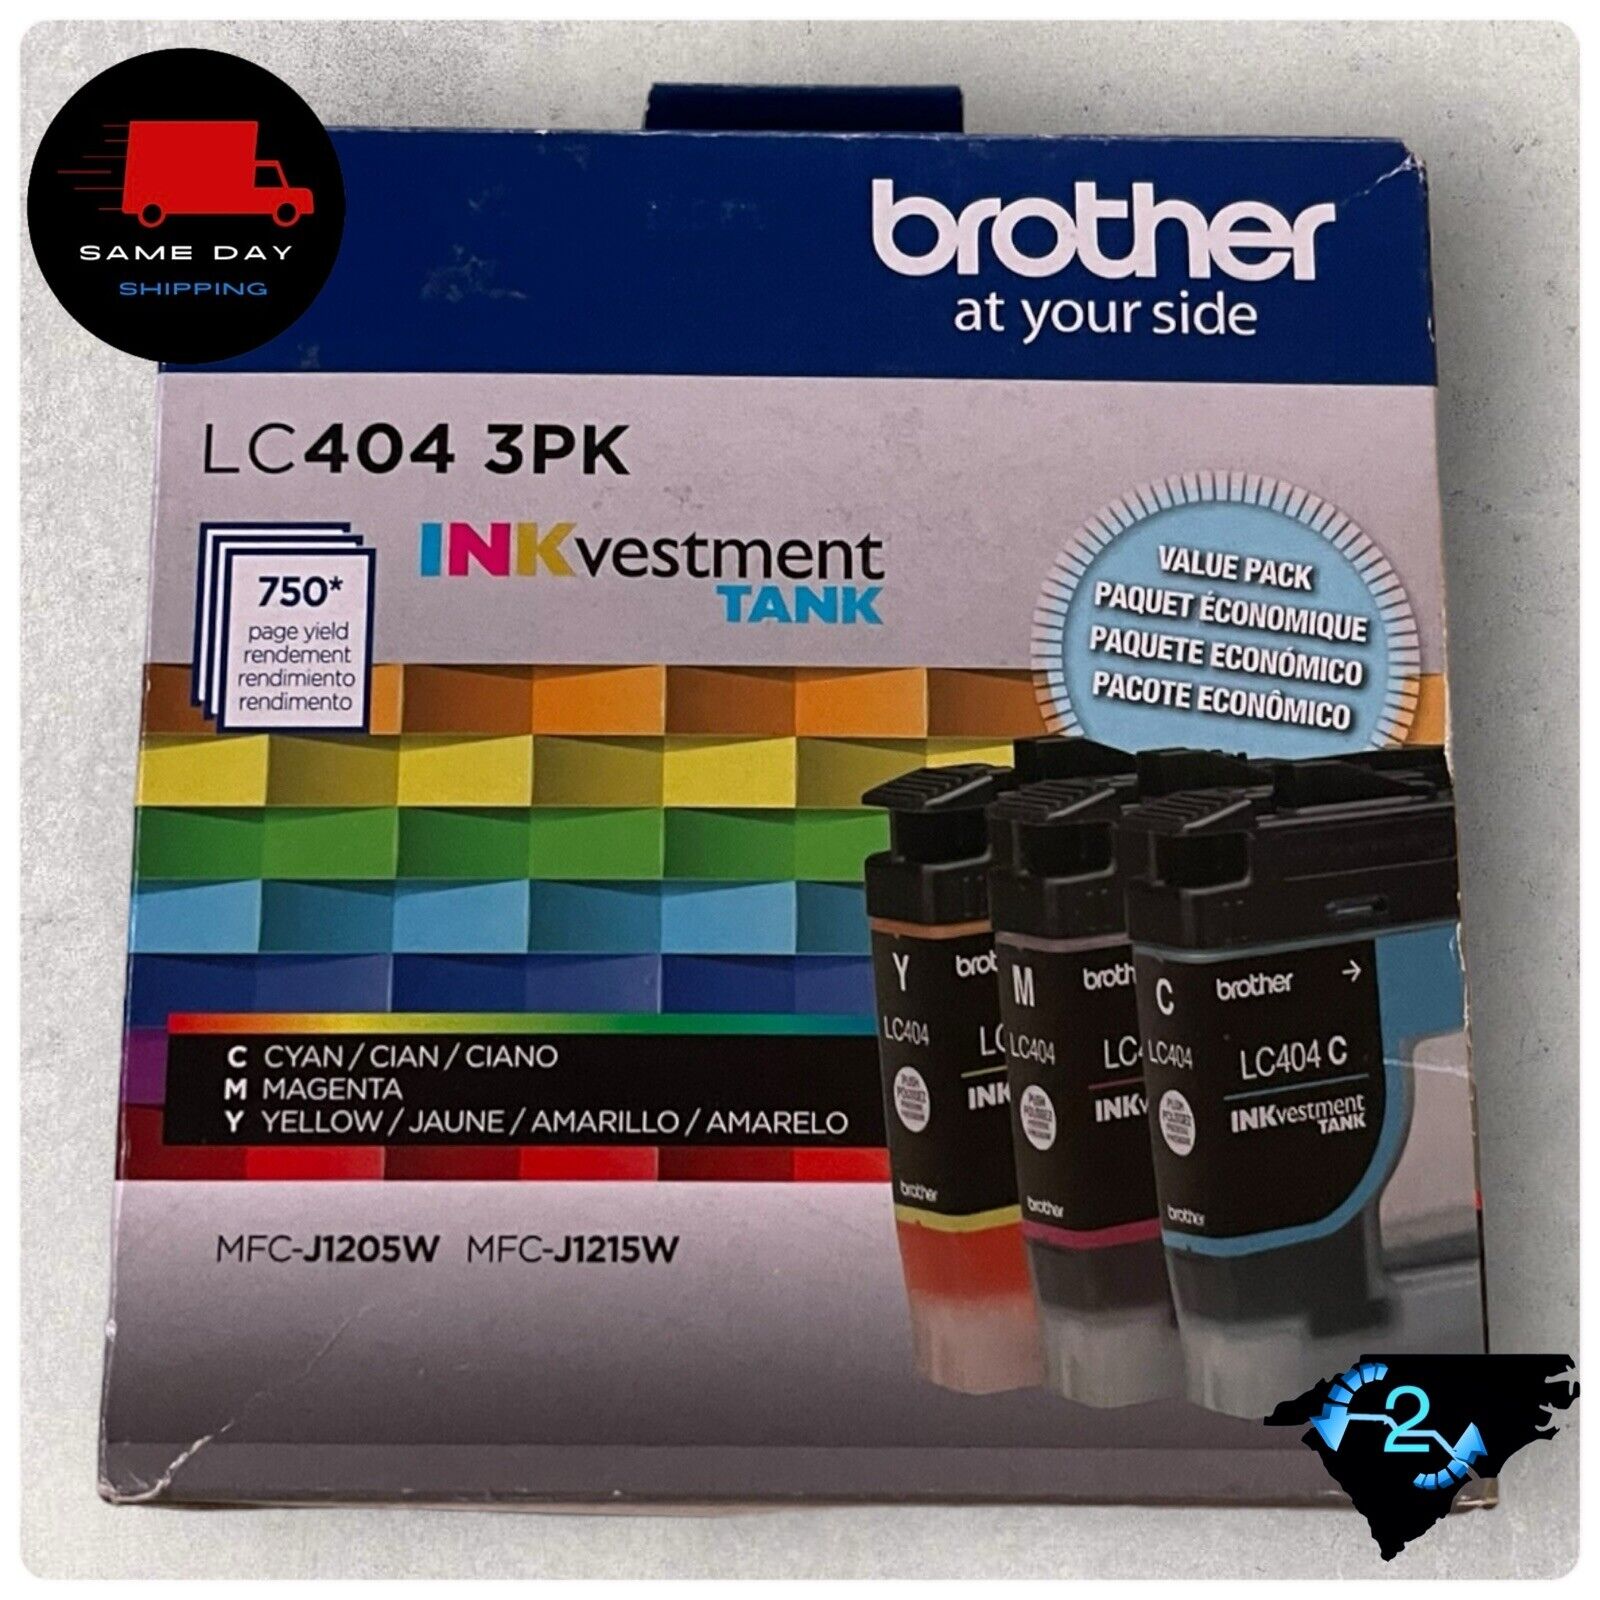 Brother LC404 3PK 3 Pack of Standard Yield C, M, Y - EXP 02/26